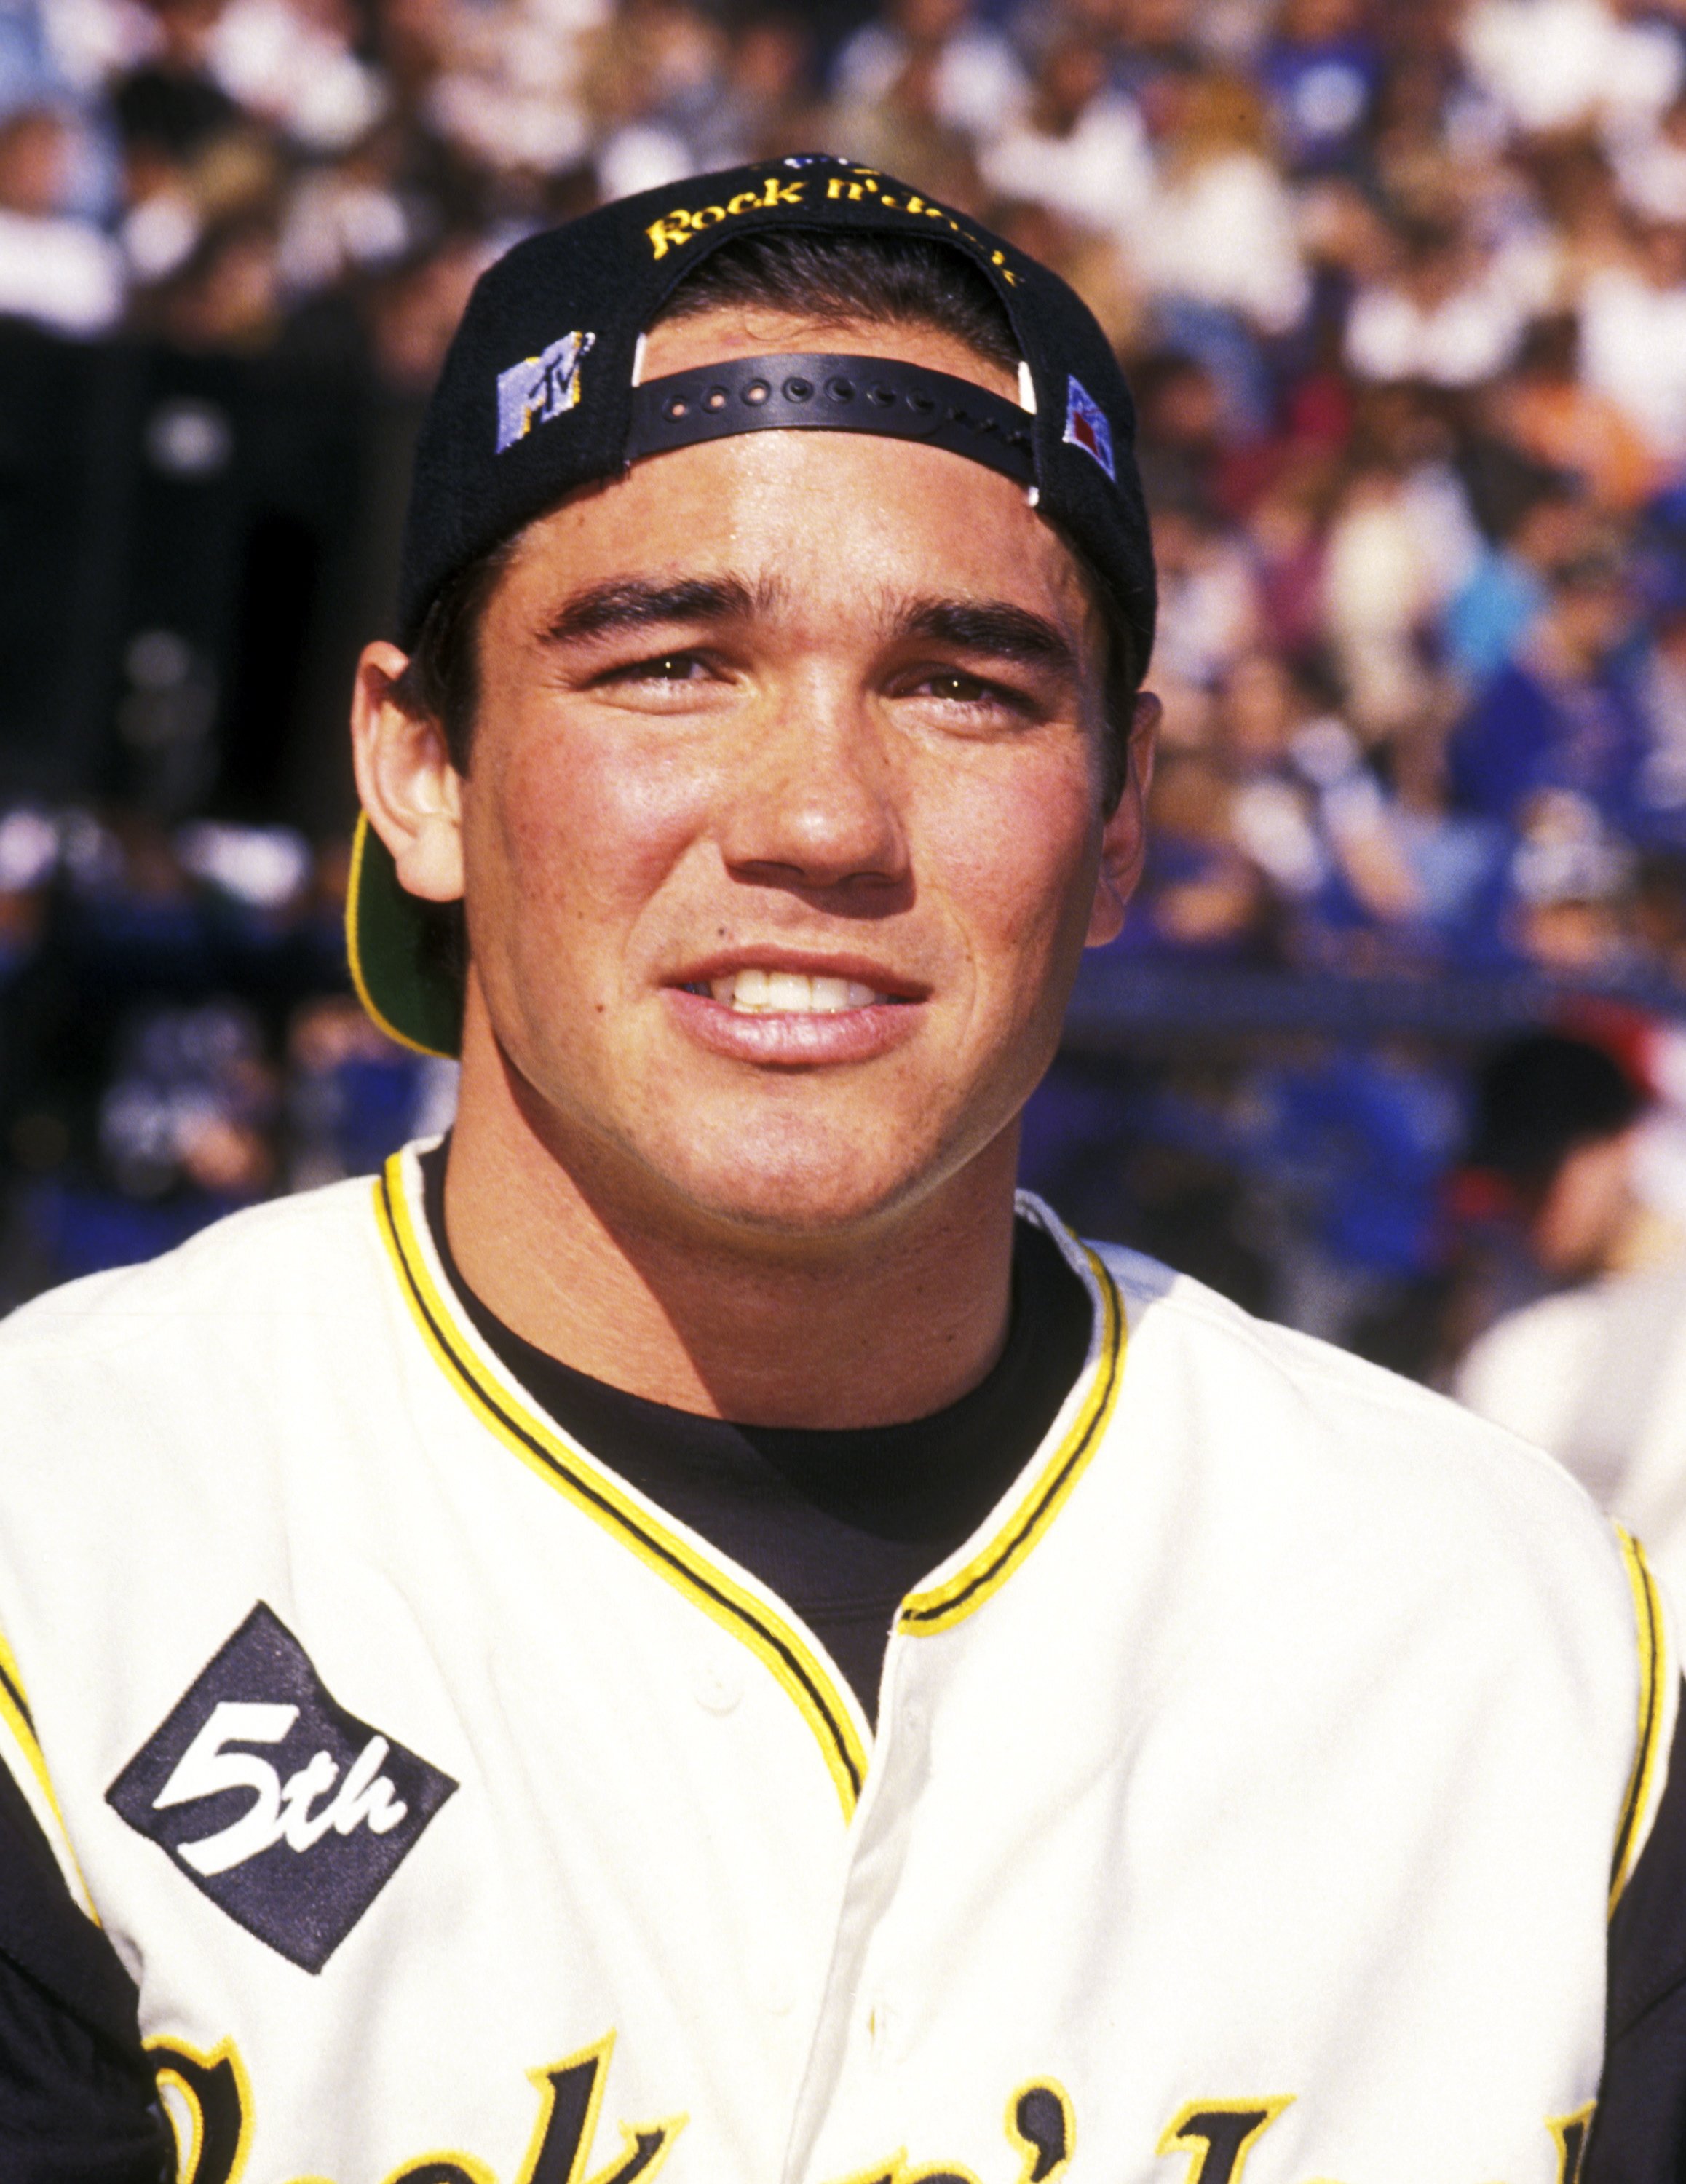 Dean Cain during the 5th Annual MTV's Rock n' Jock Baseball Game at Blair Field on January 15, 1994 in Long Beach, California. / Source: Getty Images